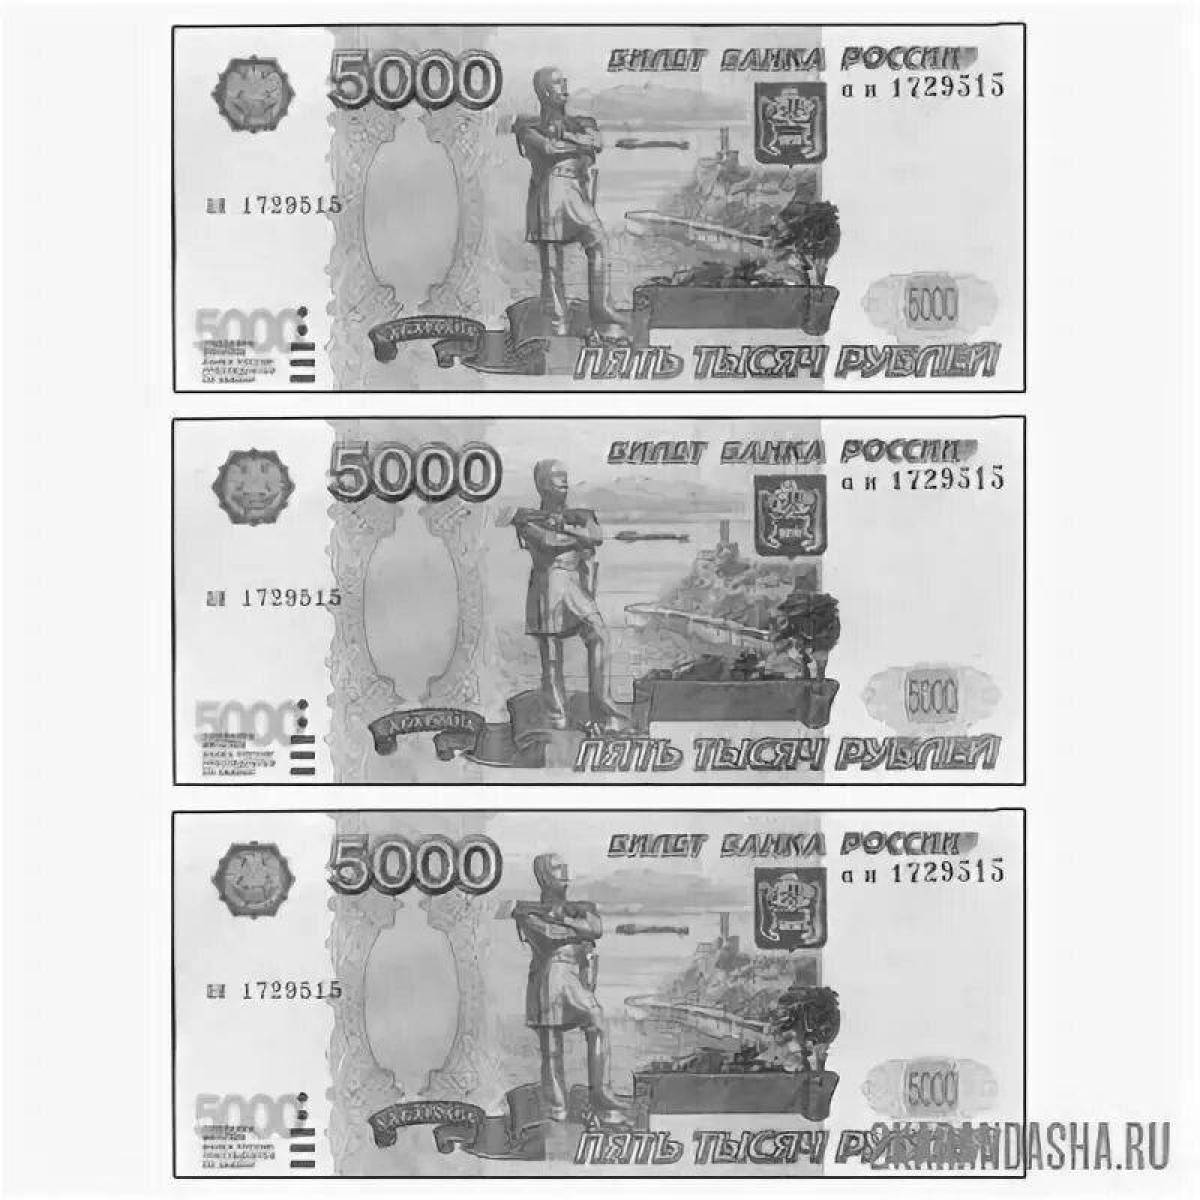 5000 rubles #9